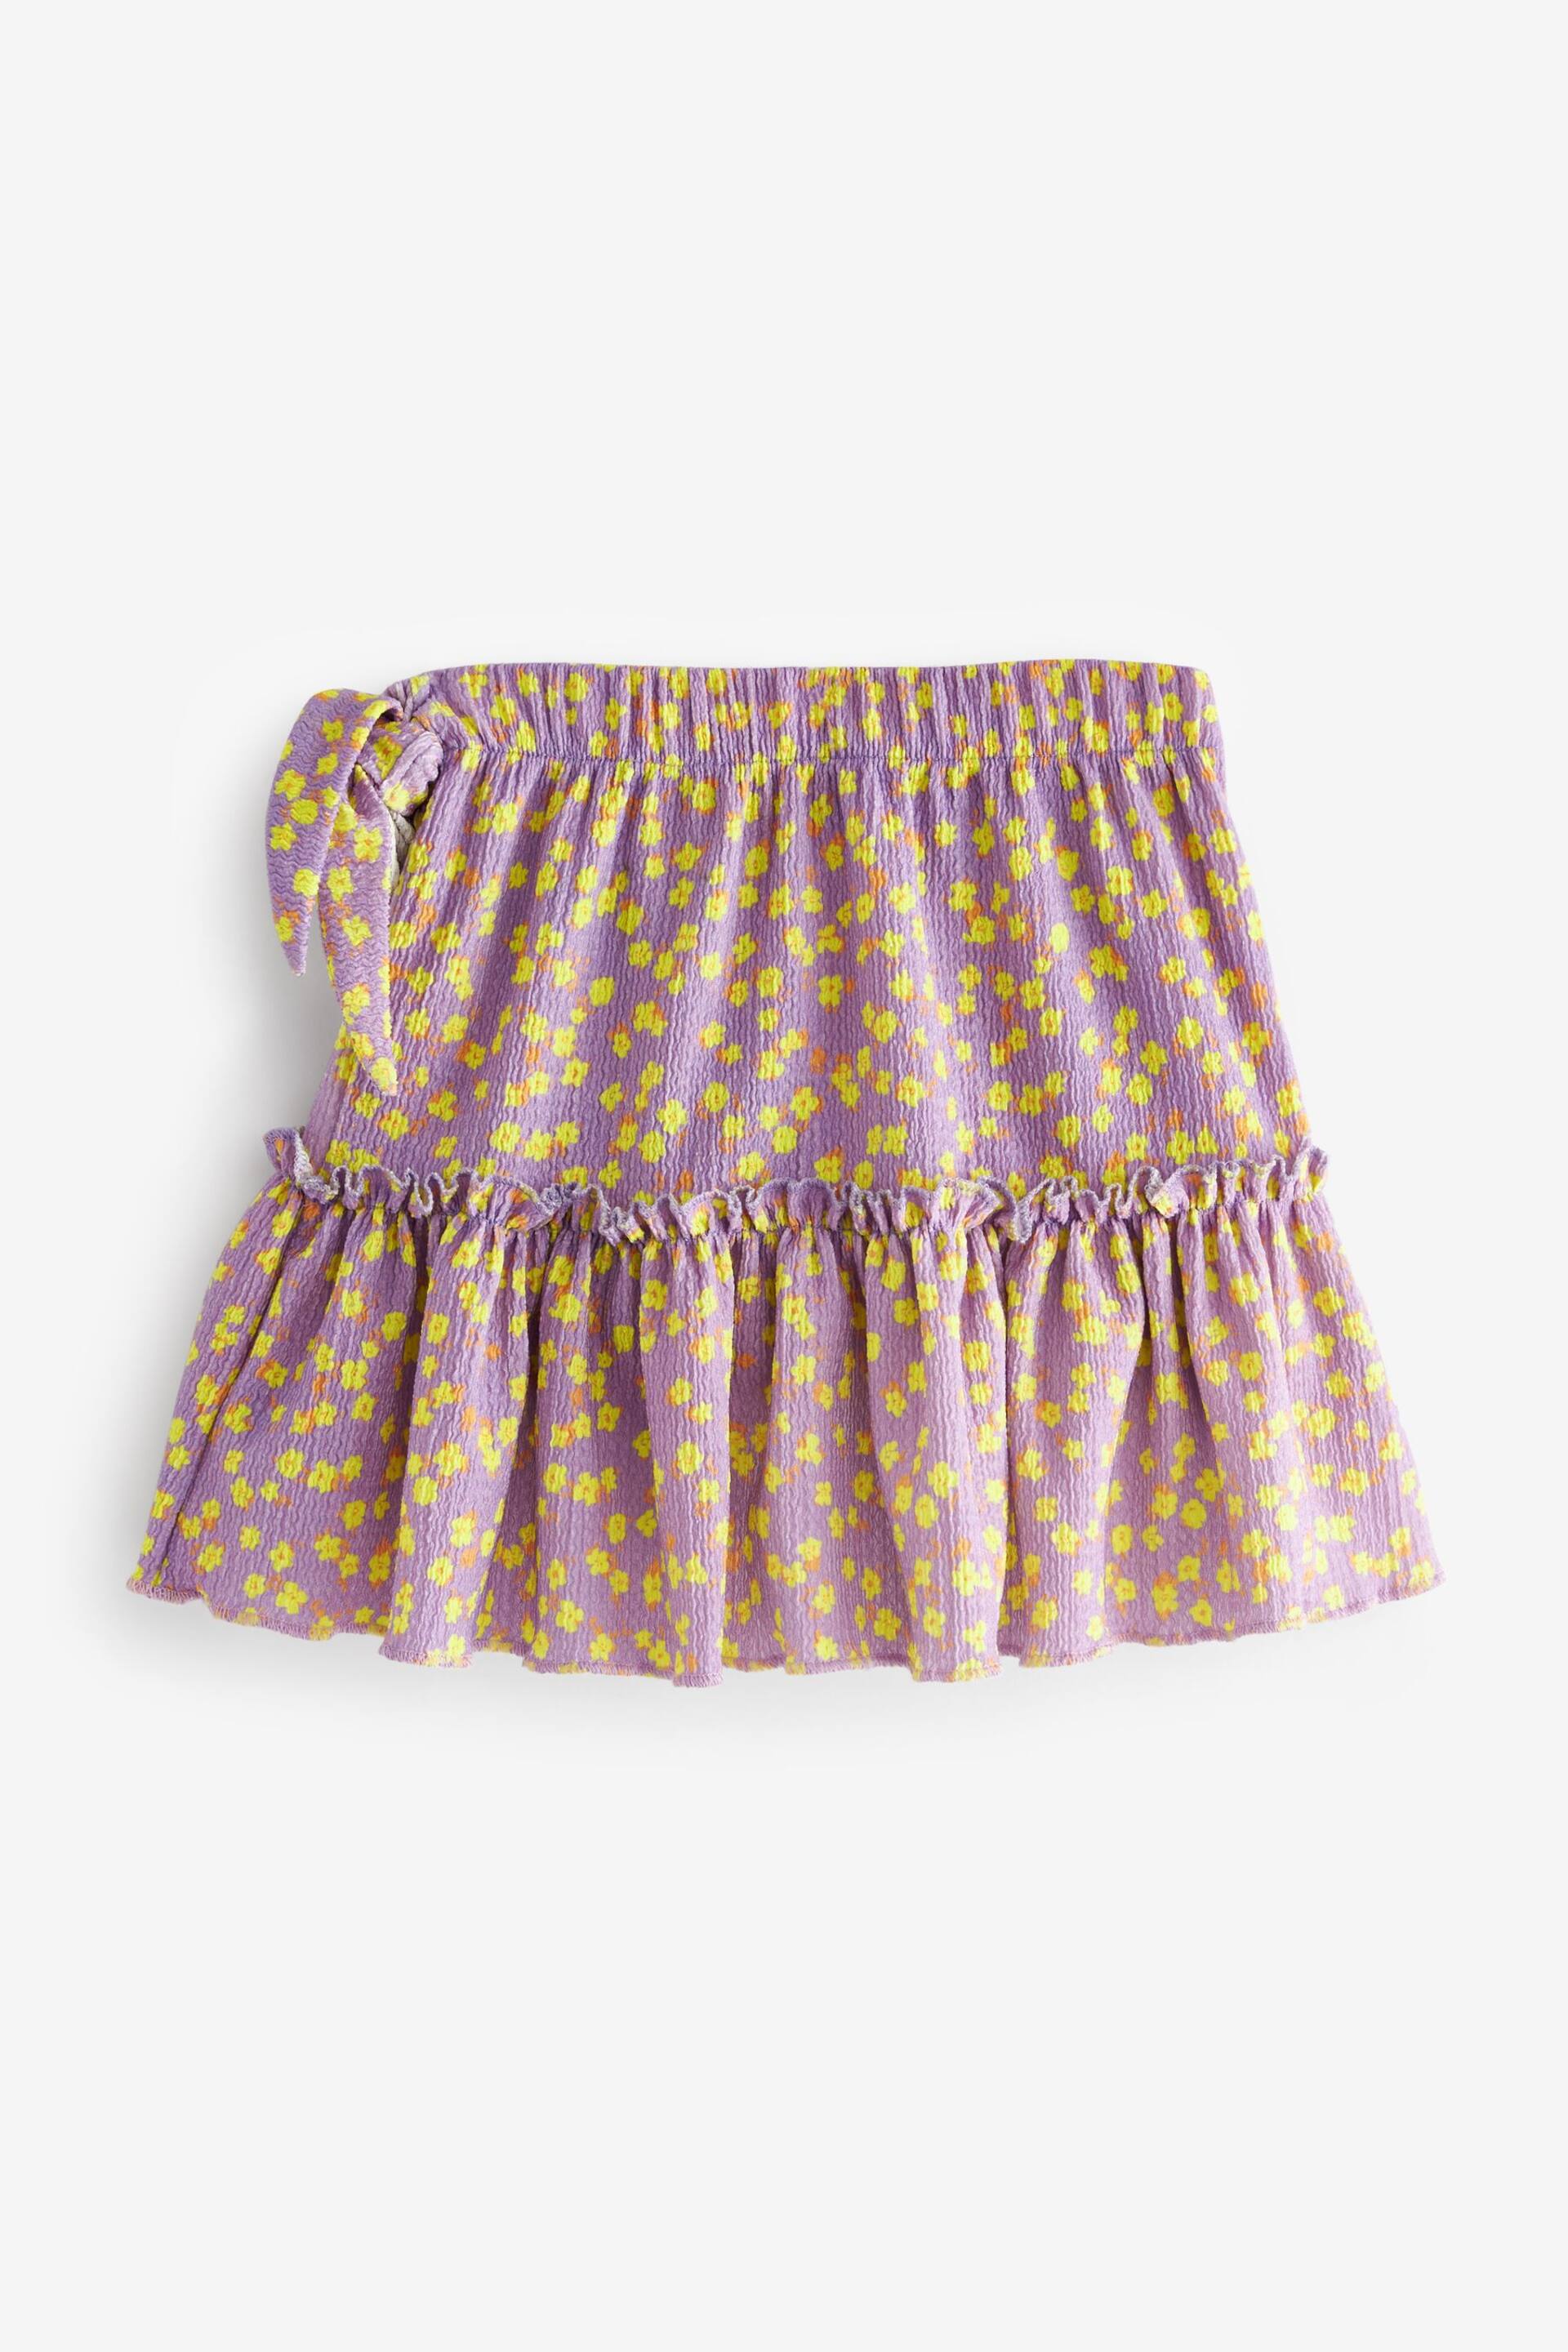 Lilac Purple Floral Ditsy Wrap Skirt (3-16yrs) - Image 7 of 8